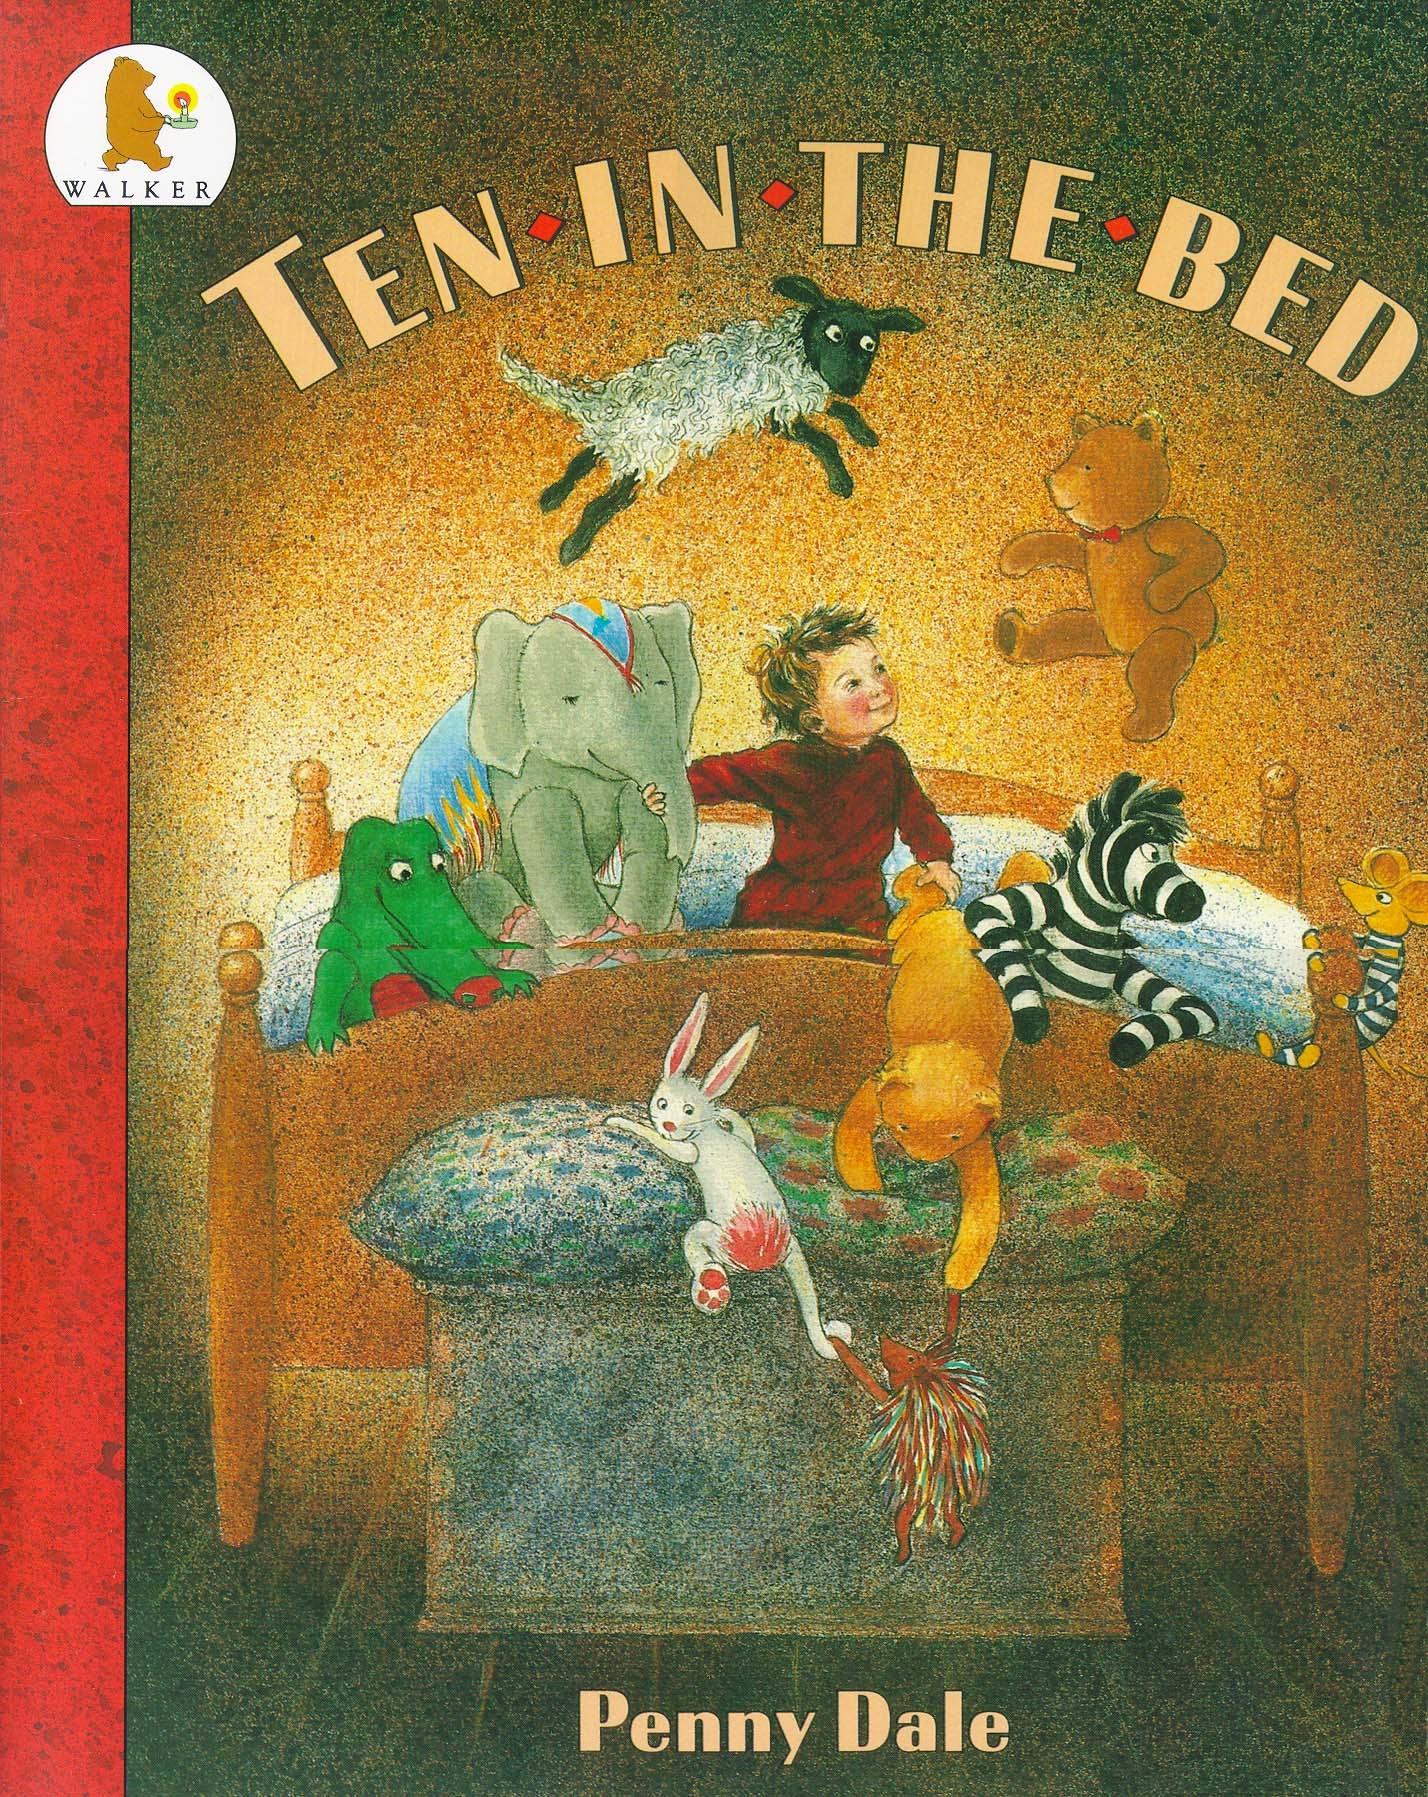 Ten in the Bed / Penny Dale / Taschenbuch / o. Pag. / Englisch / 1998 / Walker Books Ltd / EAN 9780744563252 - Dale, Penny